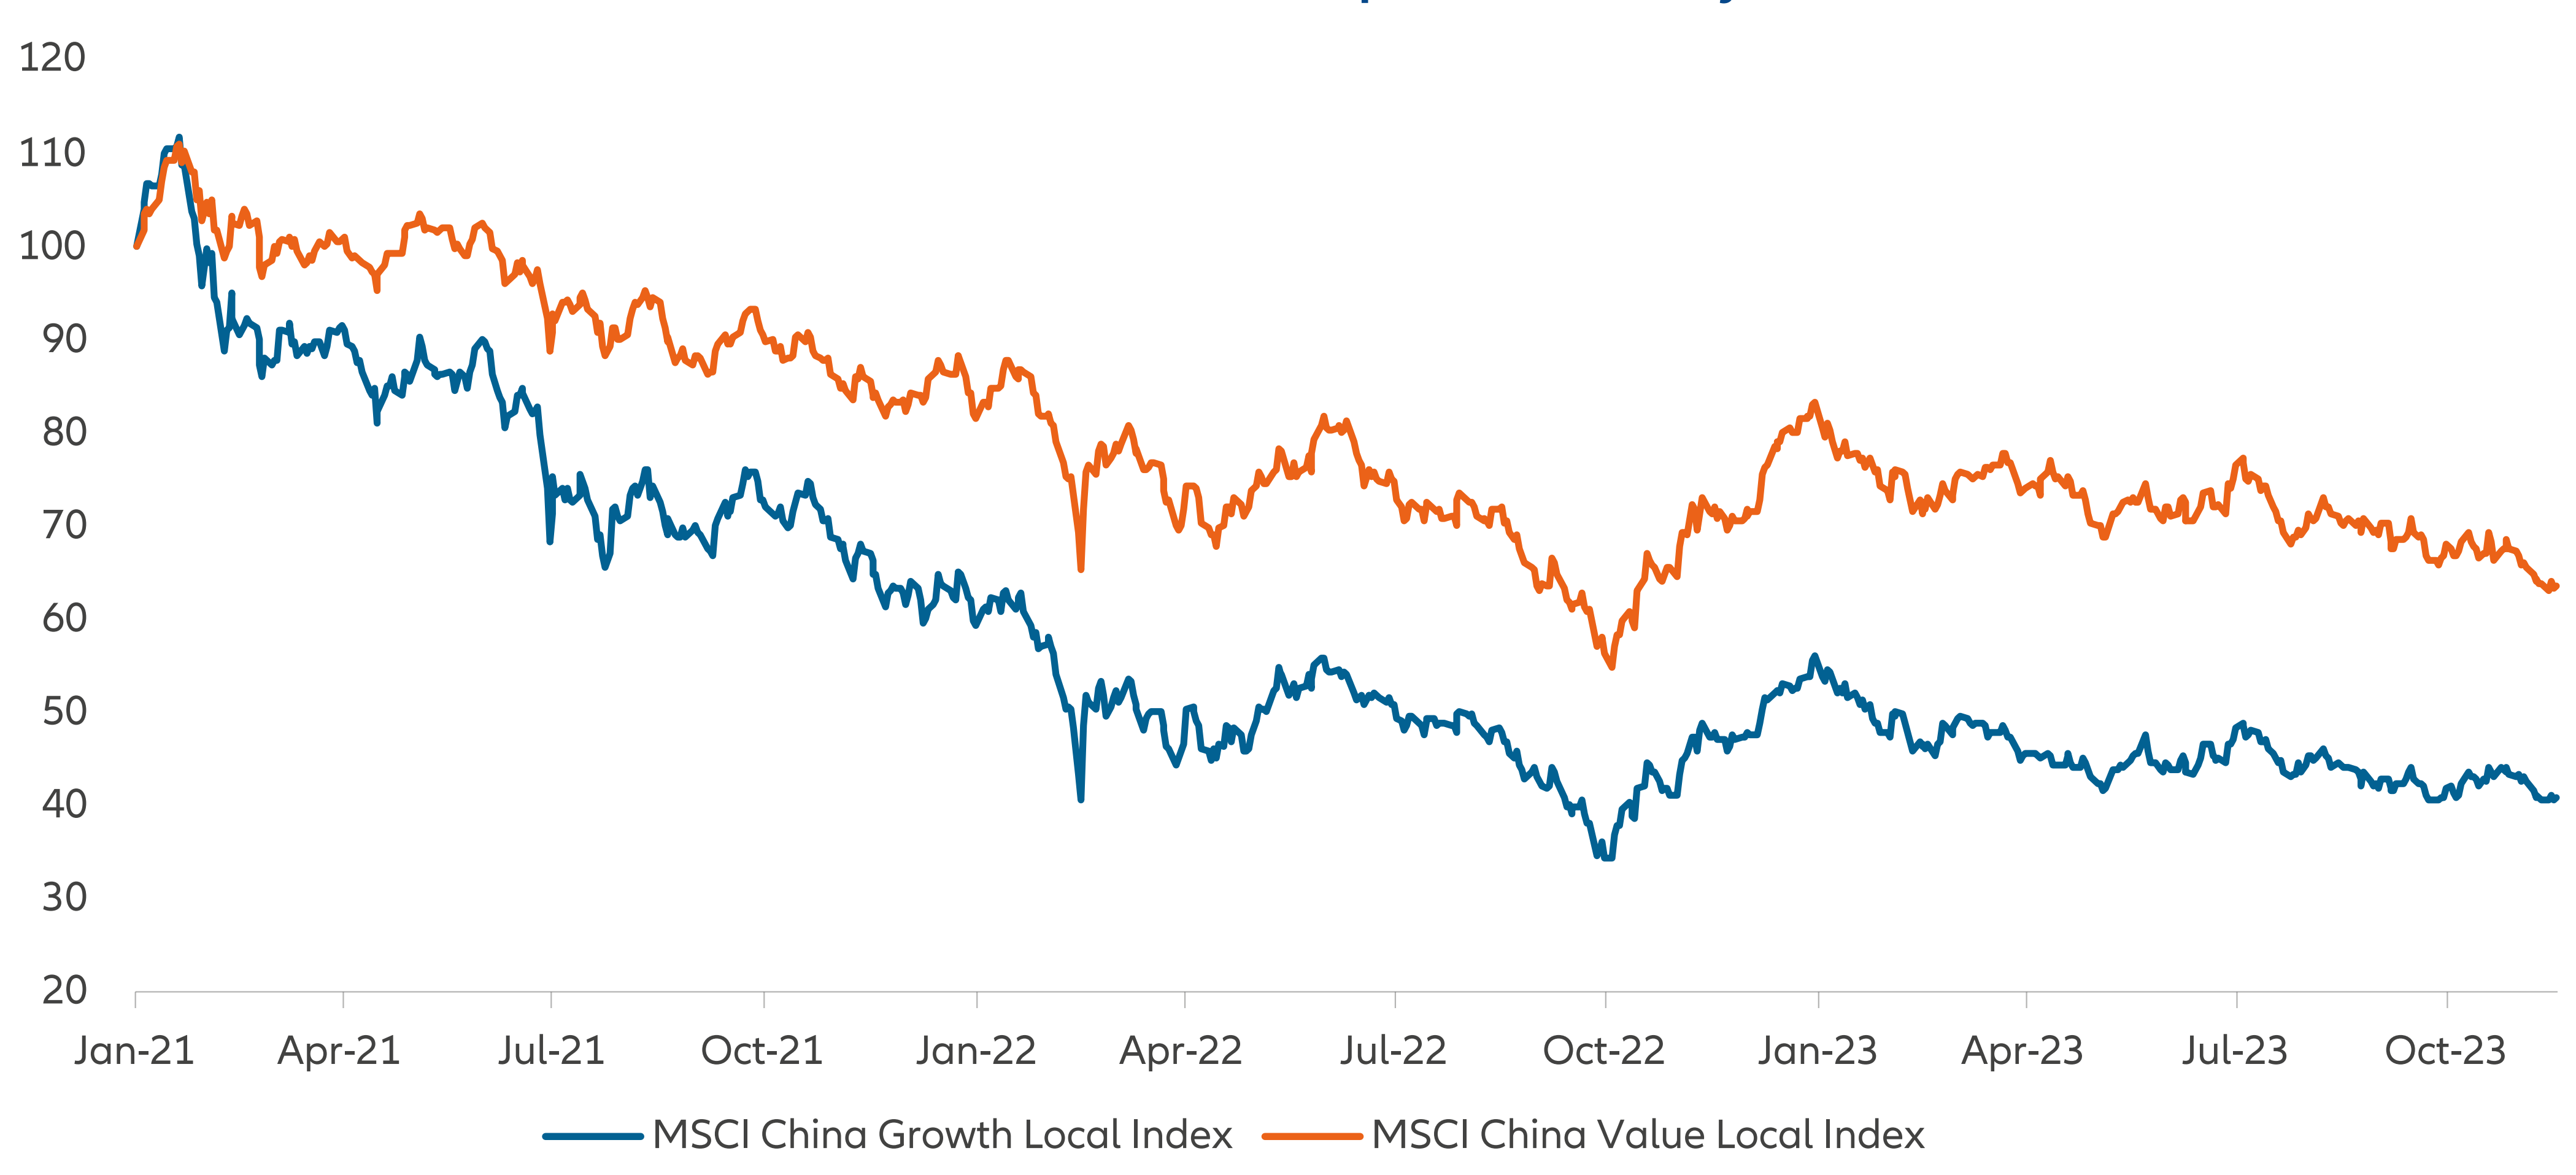 Exhibit 2: MSCI China Index – Growth vs Value since market peak in February 2021